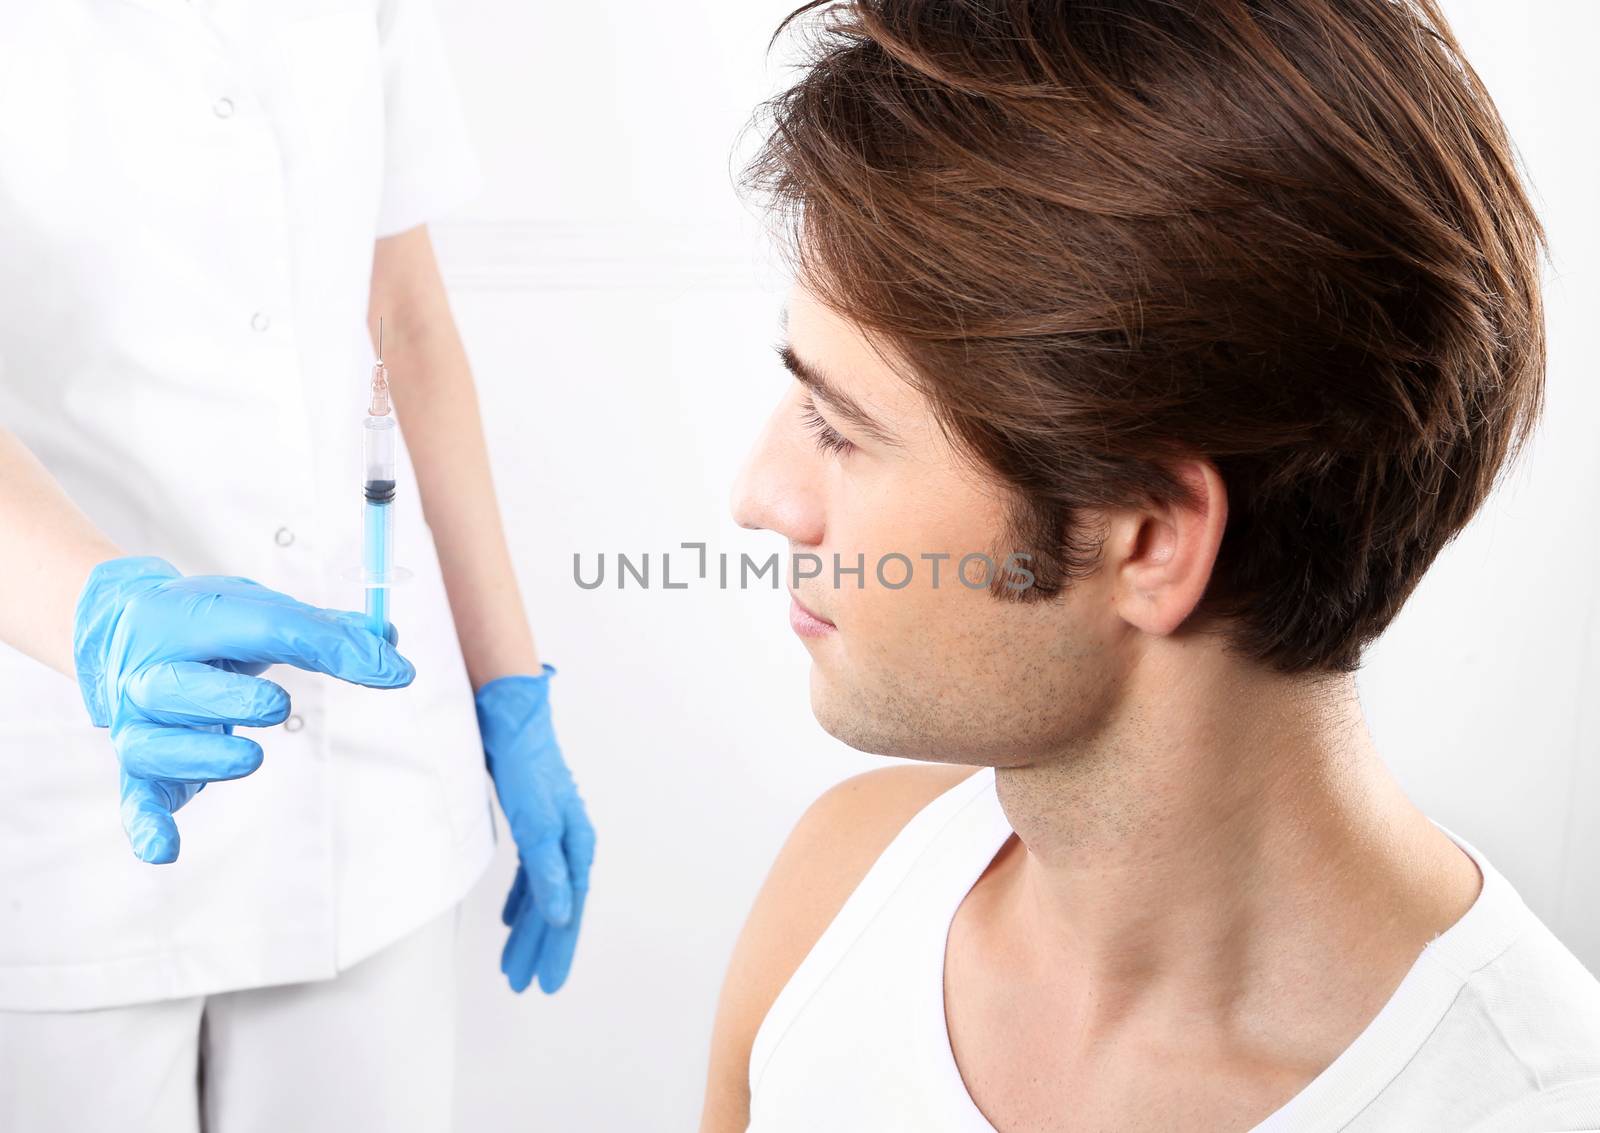 The young man is a nurse with syringe